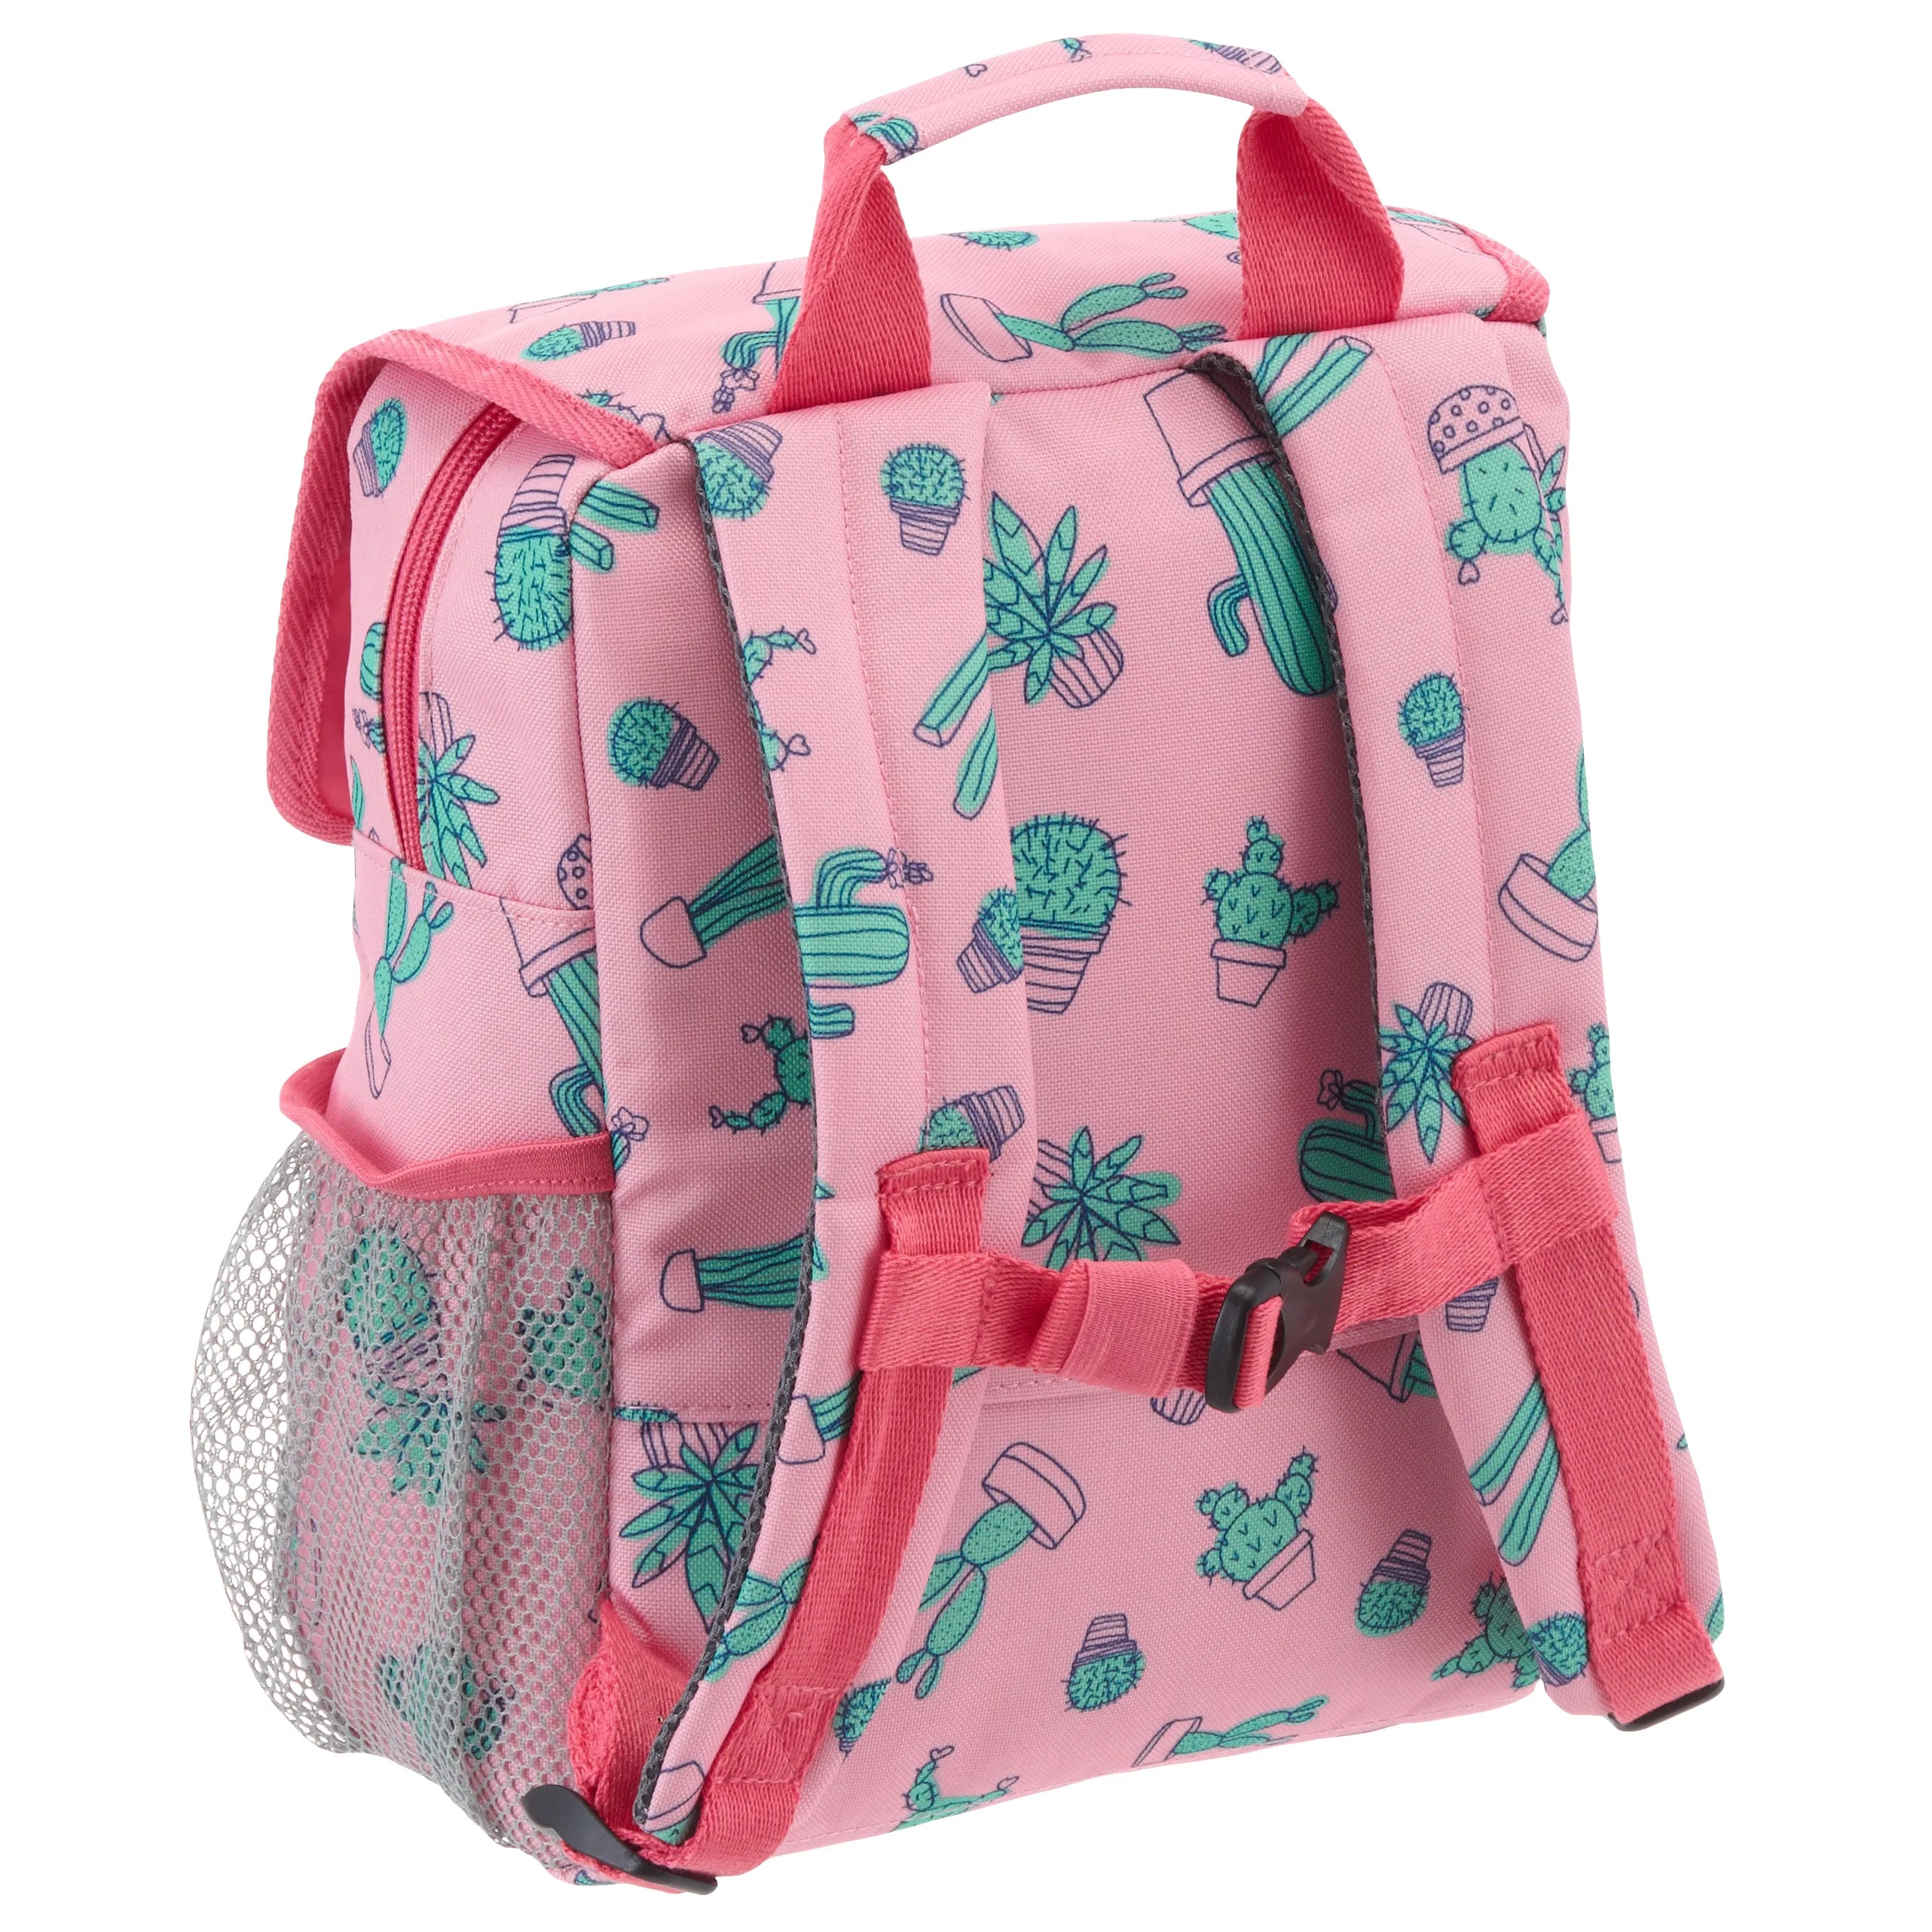 Reisenthel Kids Backpack Rucksack 28 cm - cats and dogs rose